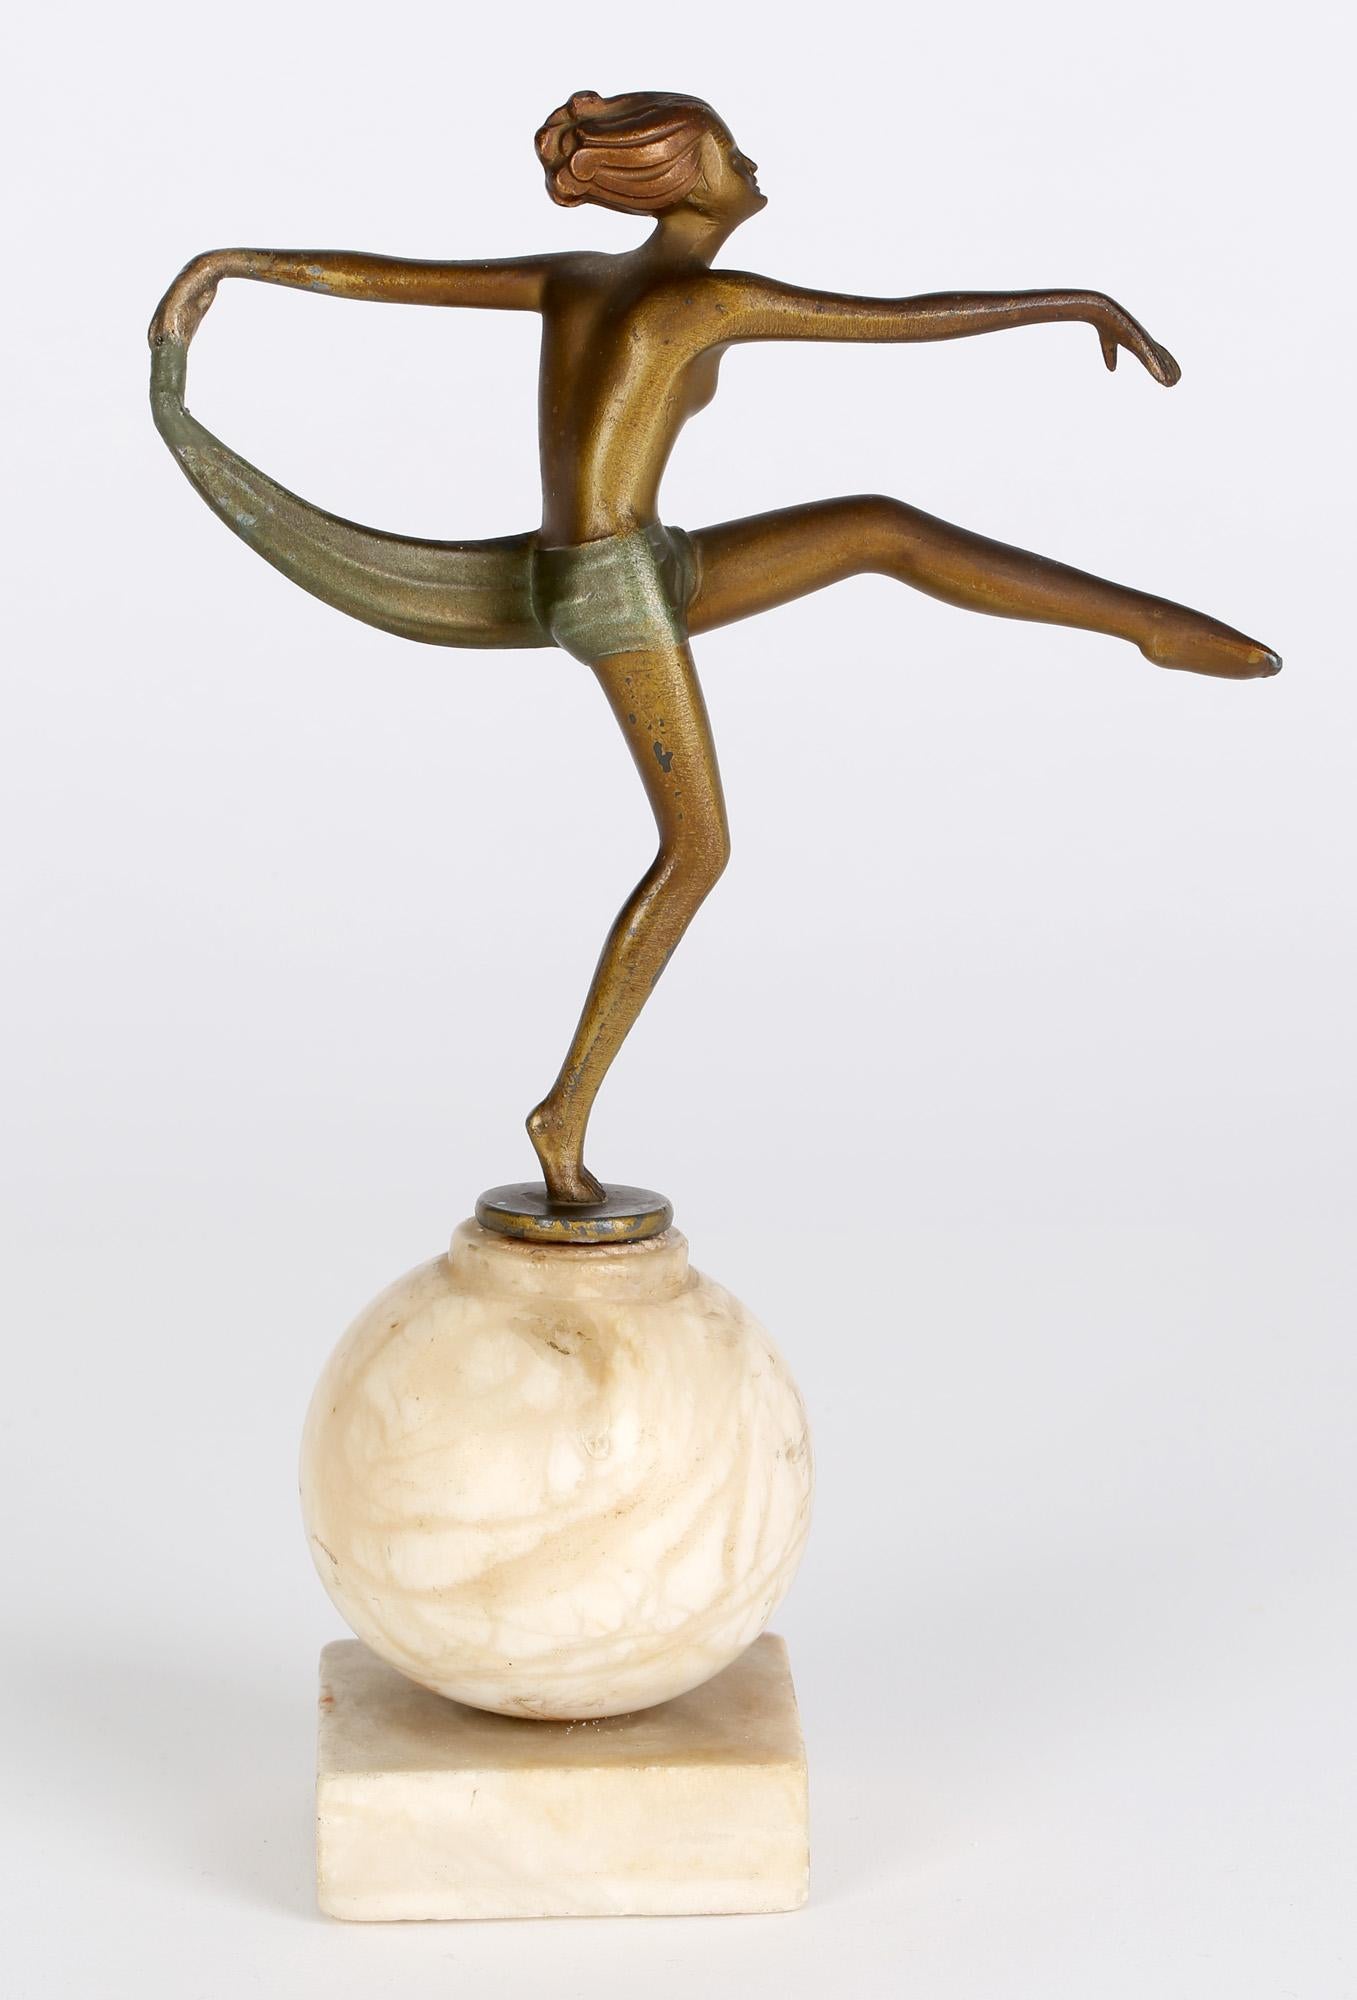 A stylish Art Deco cold painted figure of a dancer mounted on a marble ball shaped base attributed to Josef Lorenzl and dating from around 1930. The figure probably made from spelter is cold painted in a golden bronze color with a green colored